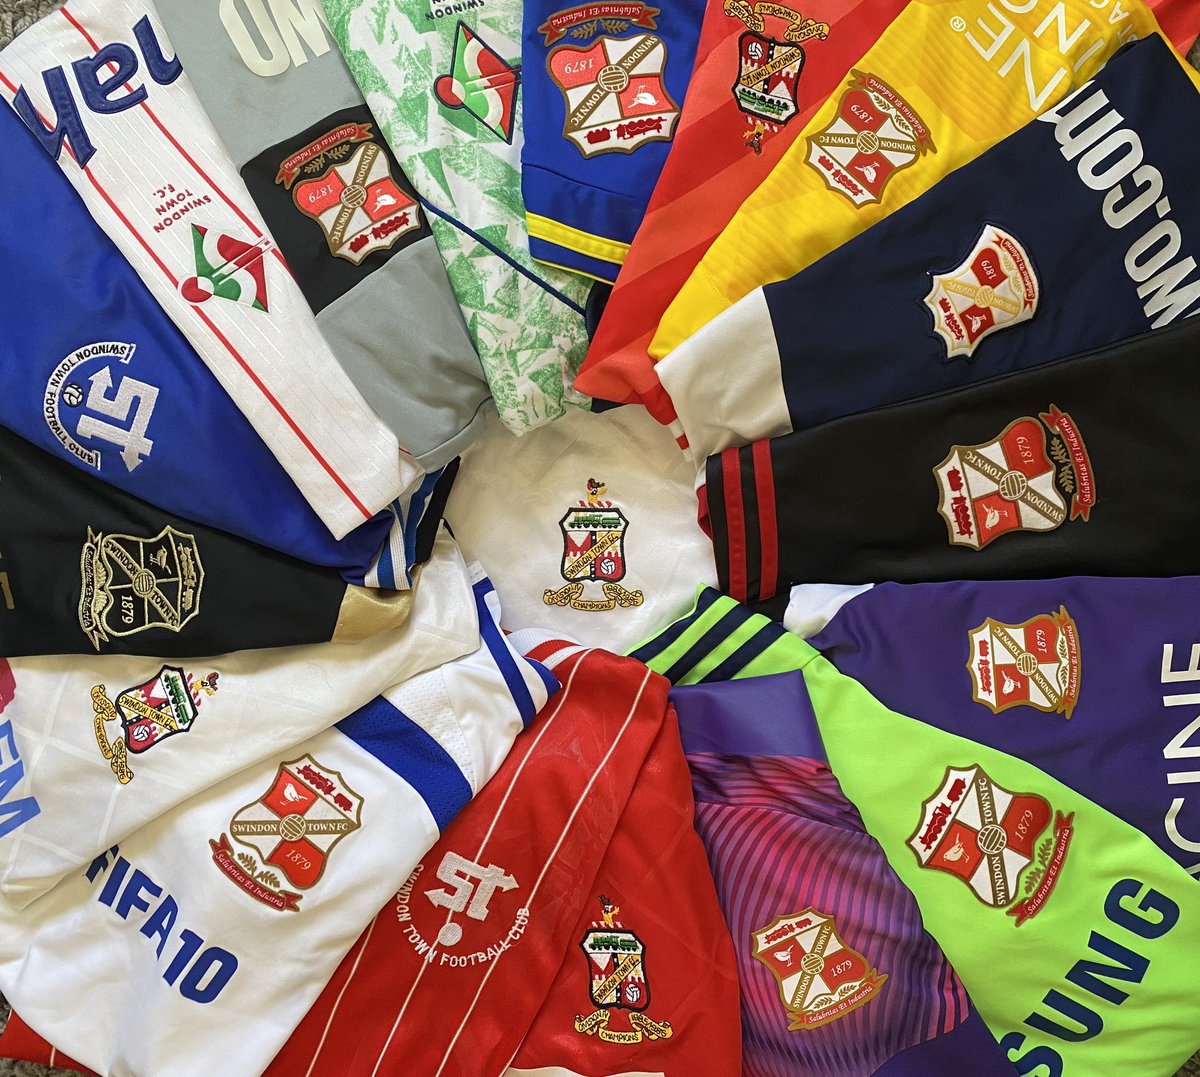 Swindon Town Crests 😍

My favourite has to be the 90’s Diamond crest - what’s yours?

#stfc #swindontown #footballshirt #footballshirts #retrofootballshirts #vintagefootball #90sfootball